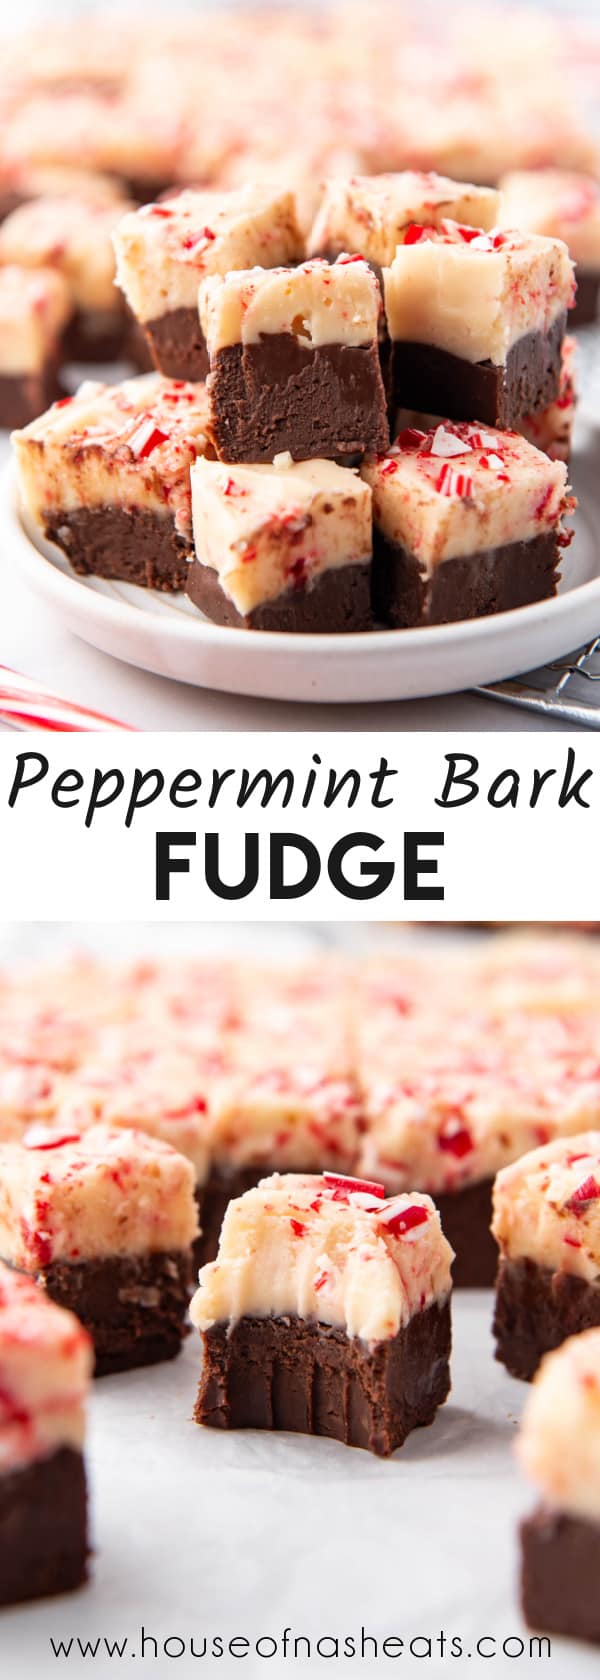 A collage of images of peppermint bark fudge with text overlay.